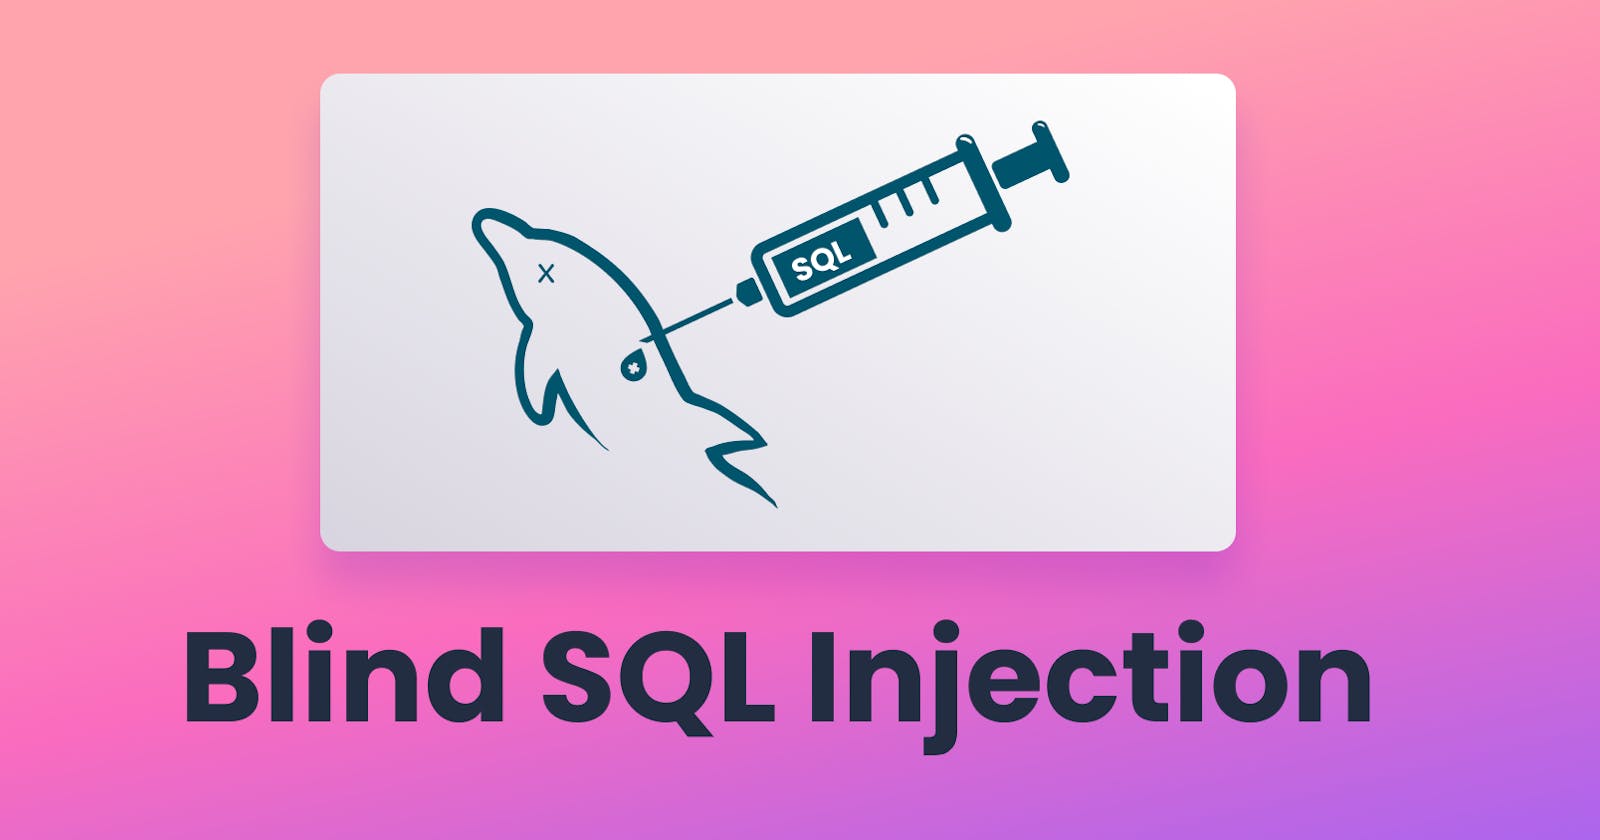 Blind SQL Injection - Threat or Child's Play?